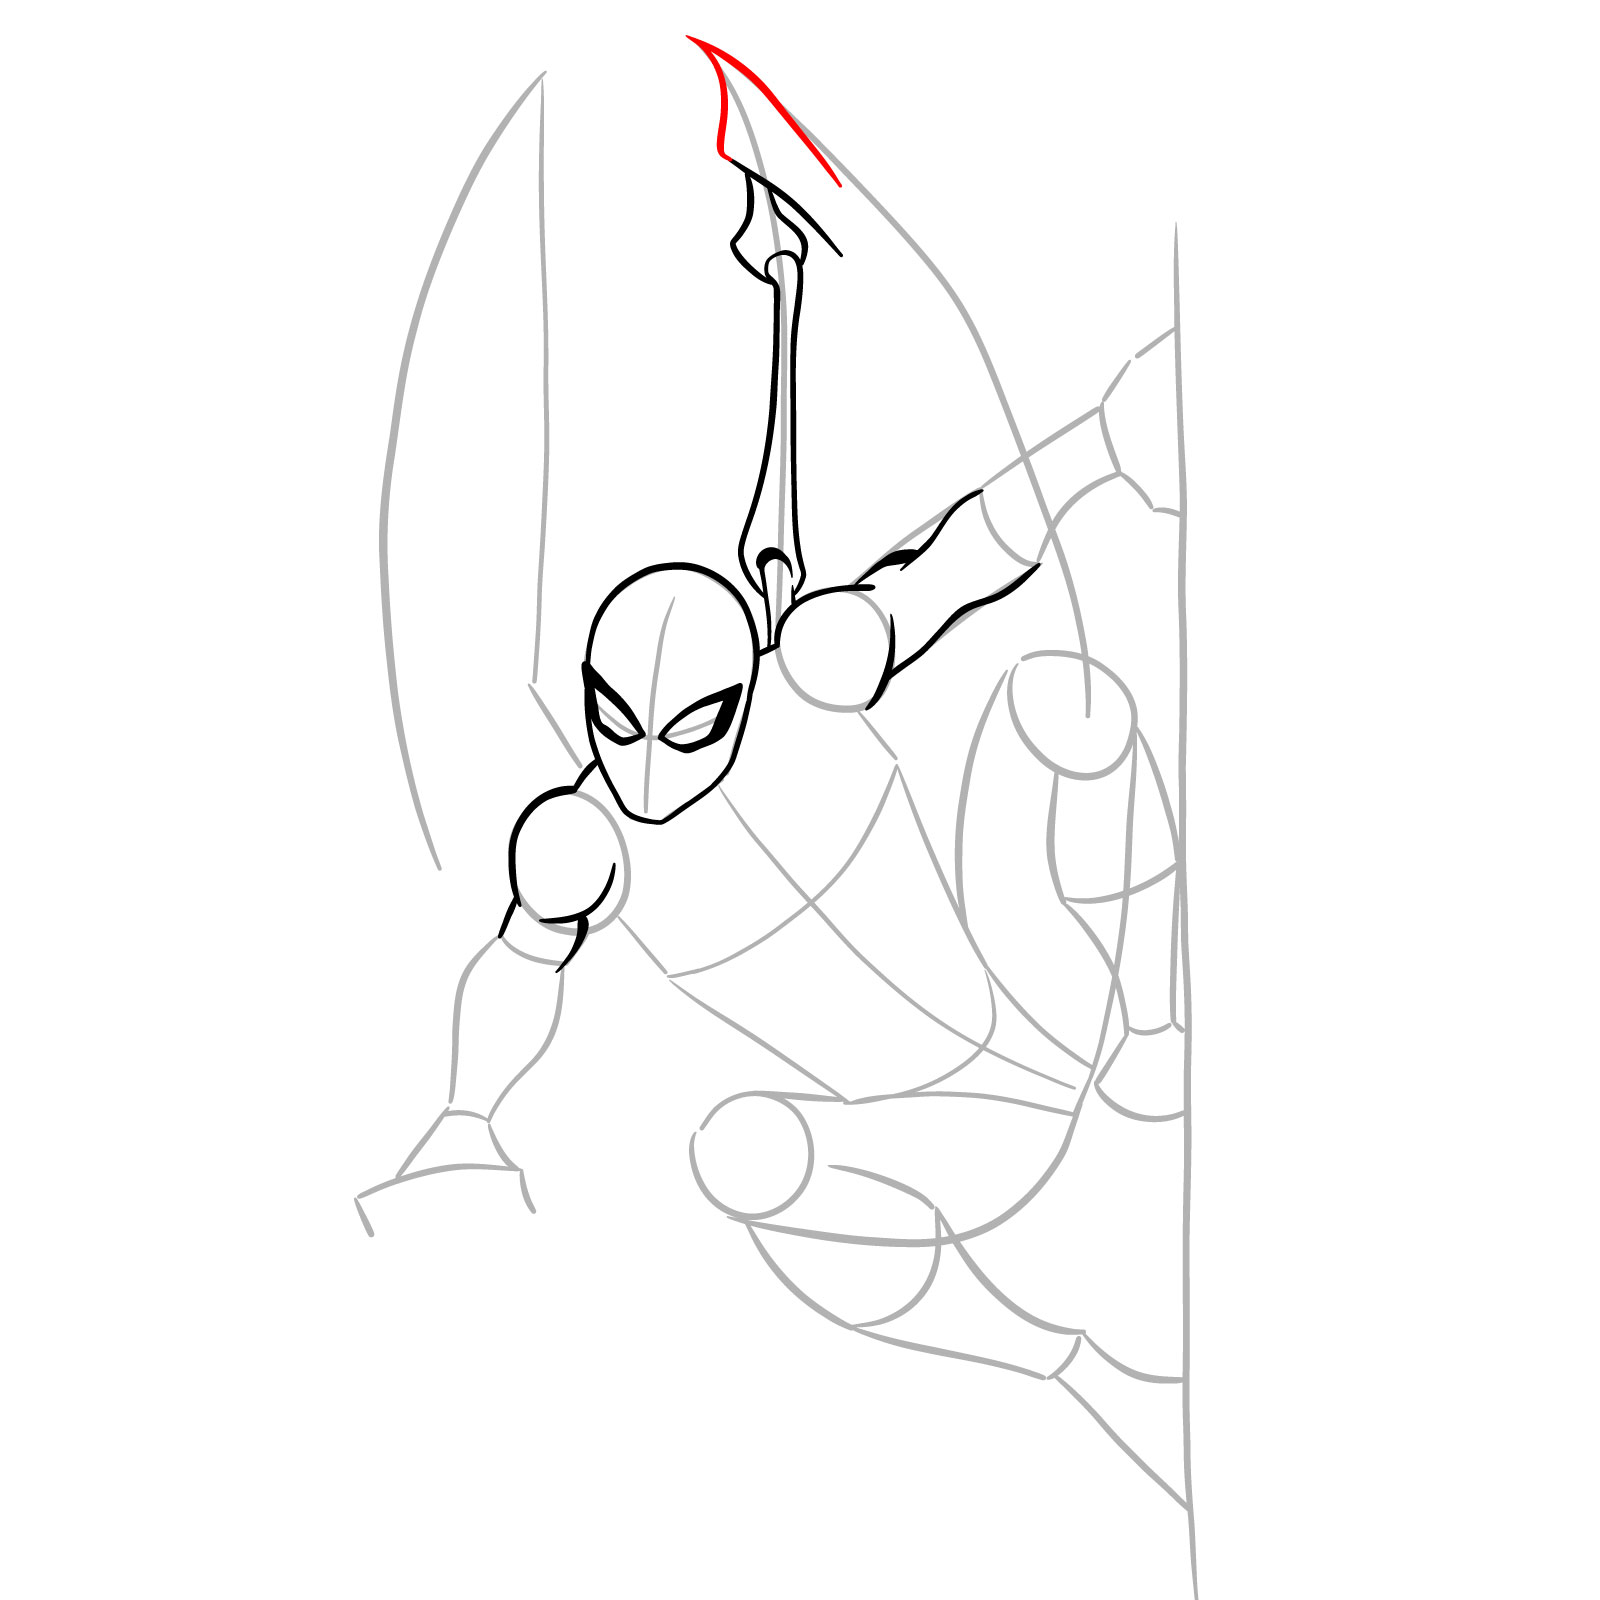 How to draw The Superior Spider-Man - step 12